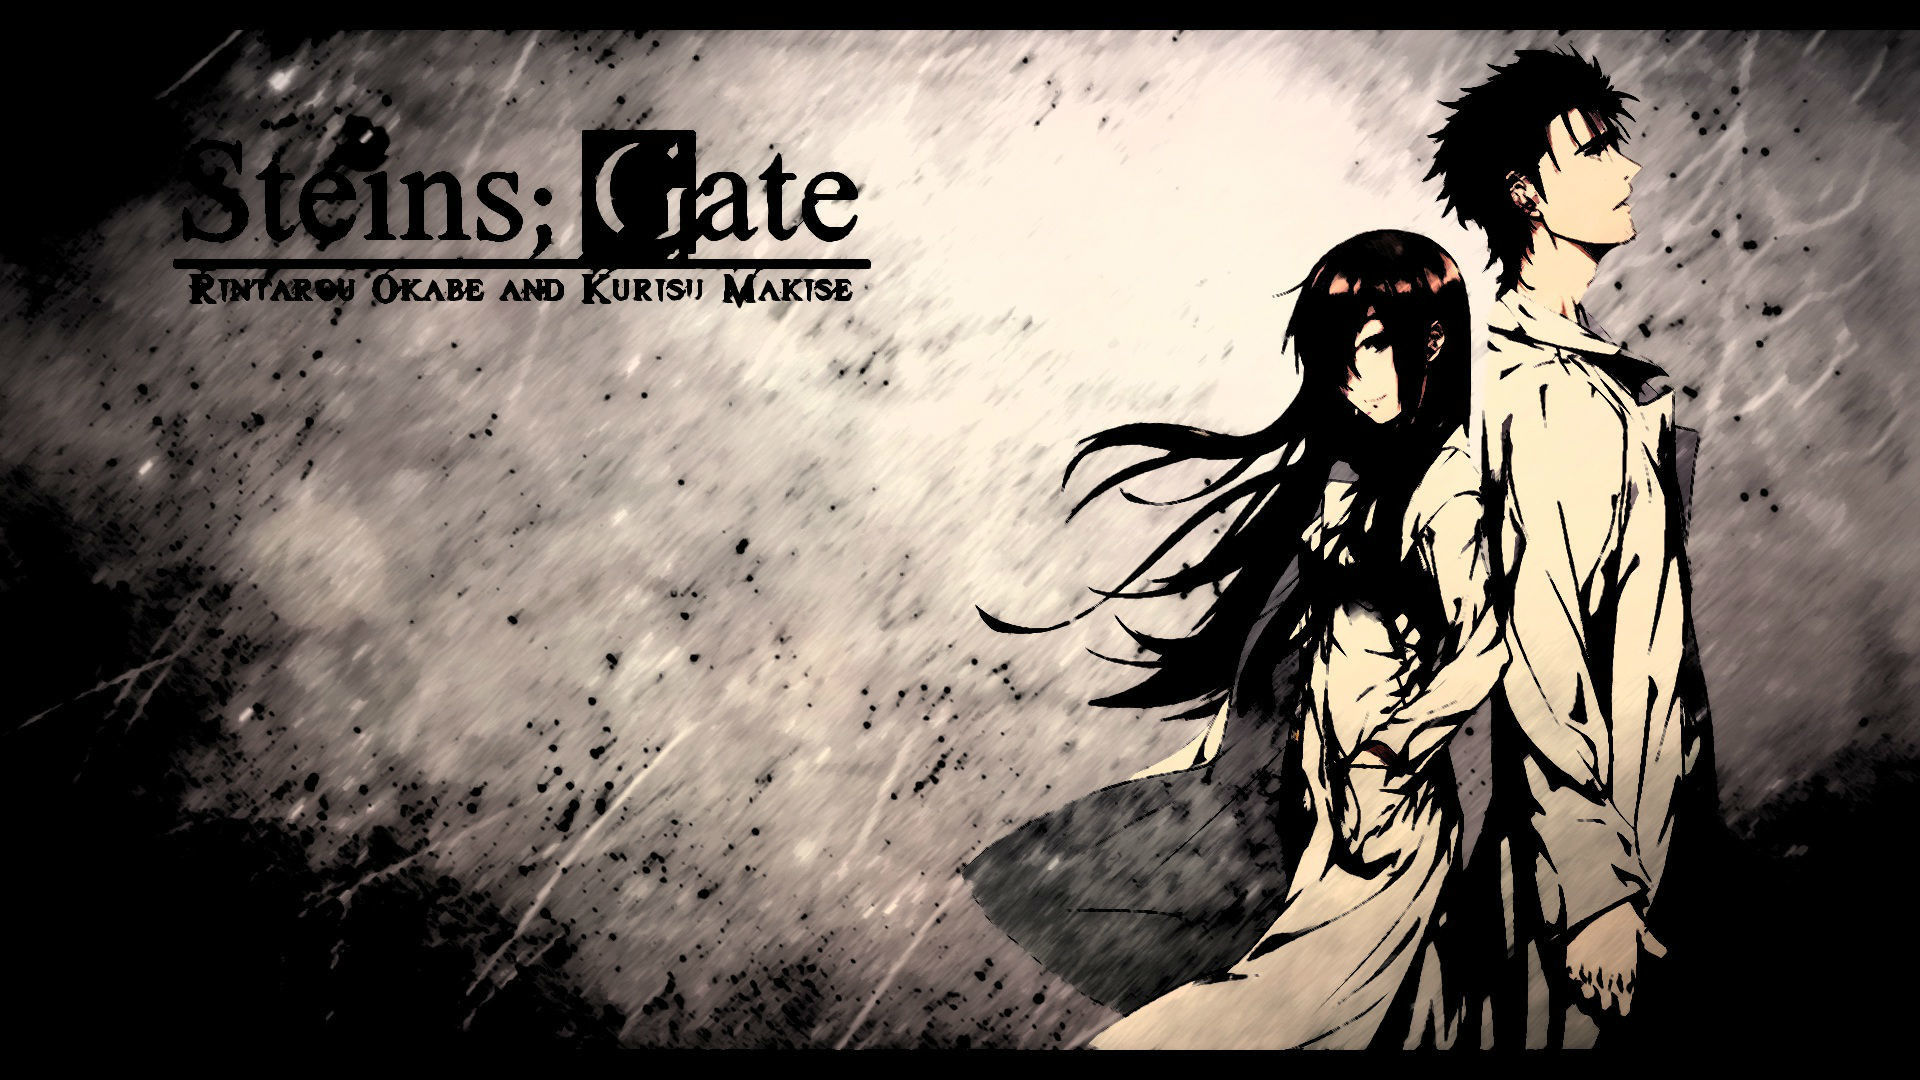 1920x1080 Gate Not an anime I would want to watch again. But as a scientist myself  (albeit in a totally different field), I think this was brilliantly crafted.